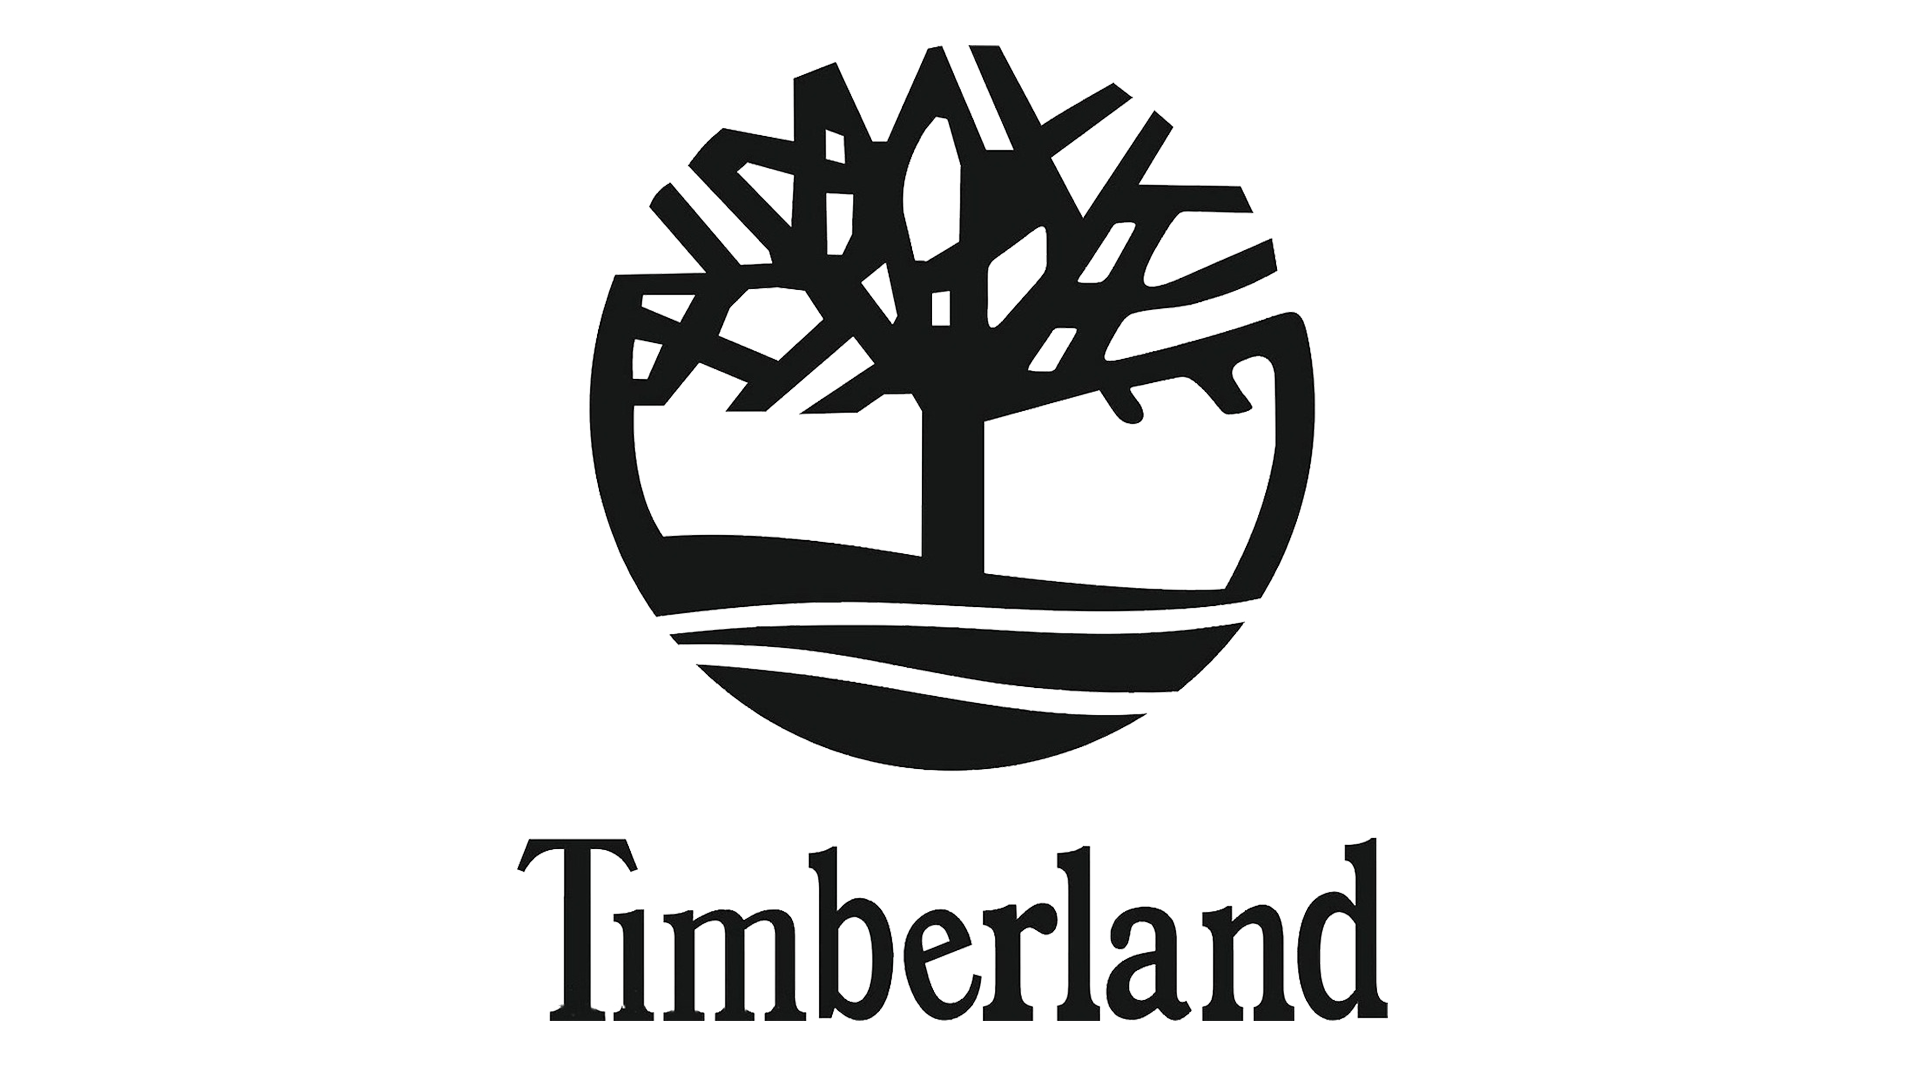 50% discount off Timberland purchase for Healthcare workers and First Responders